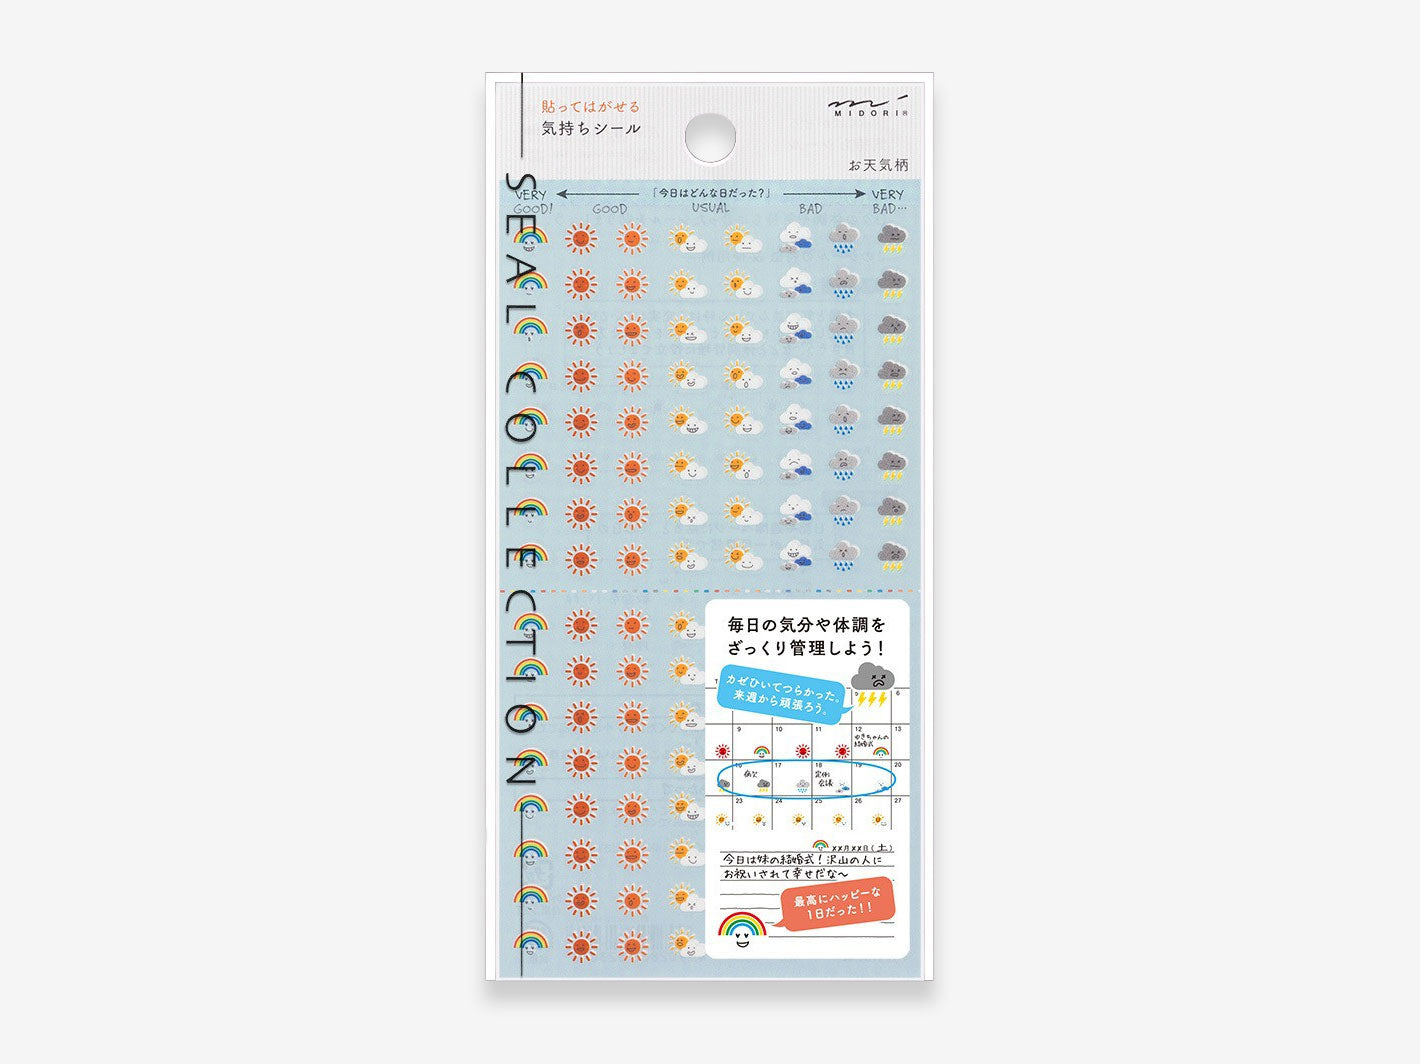 Weather Diary Stickers